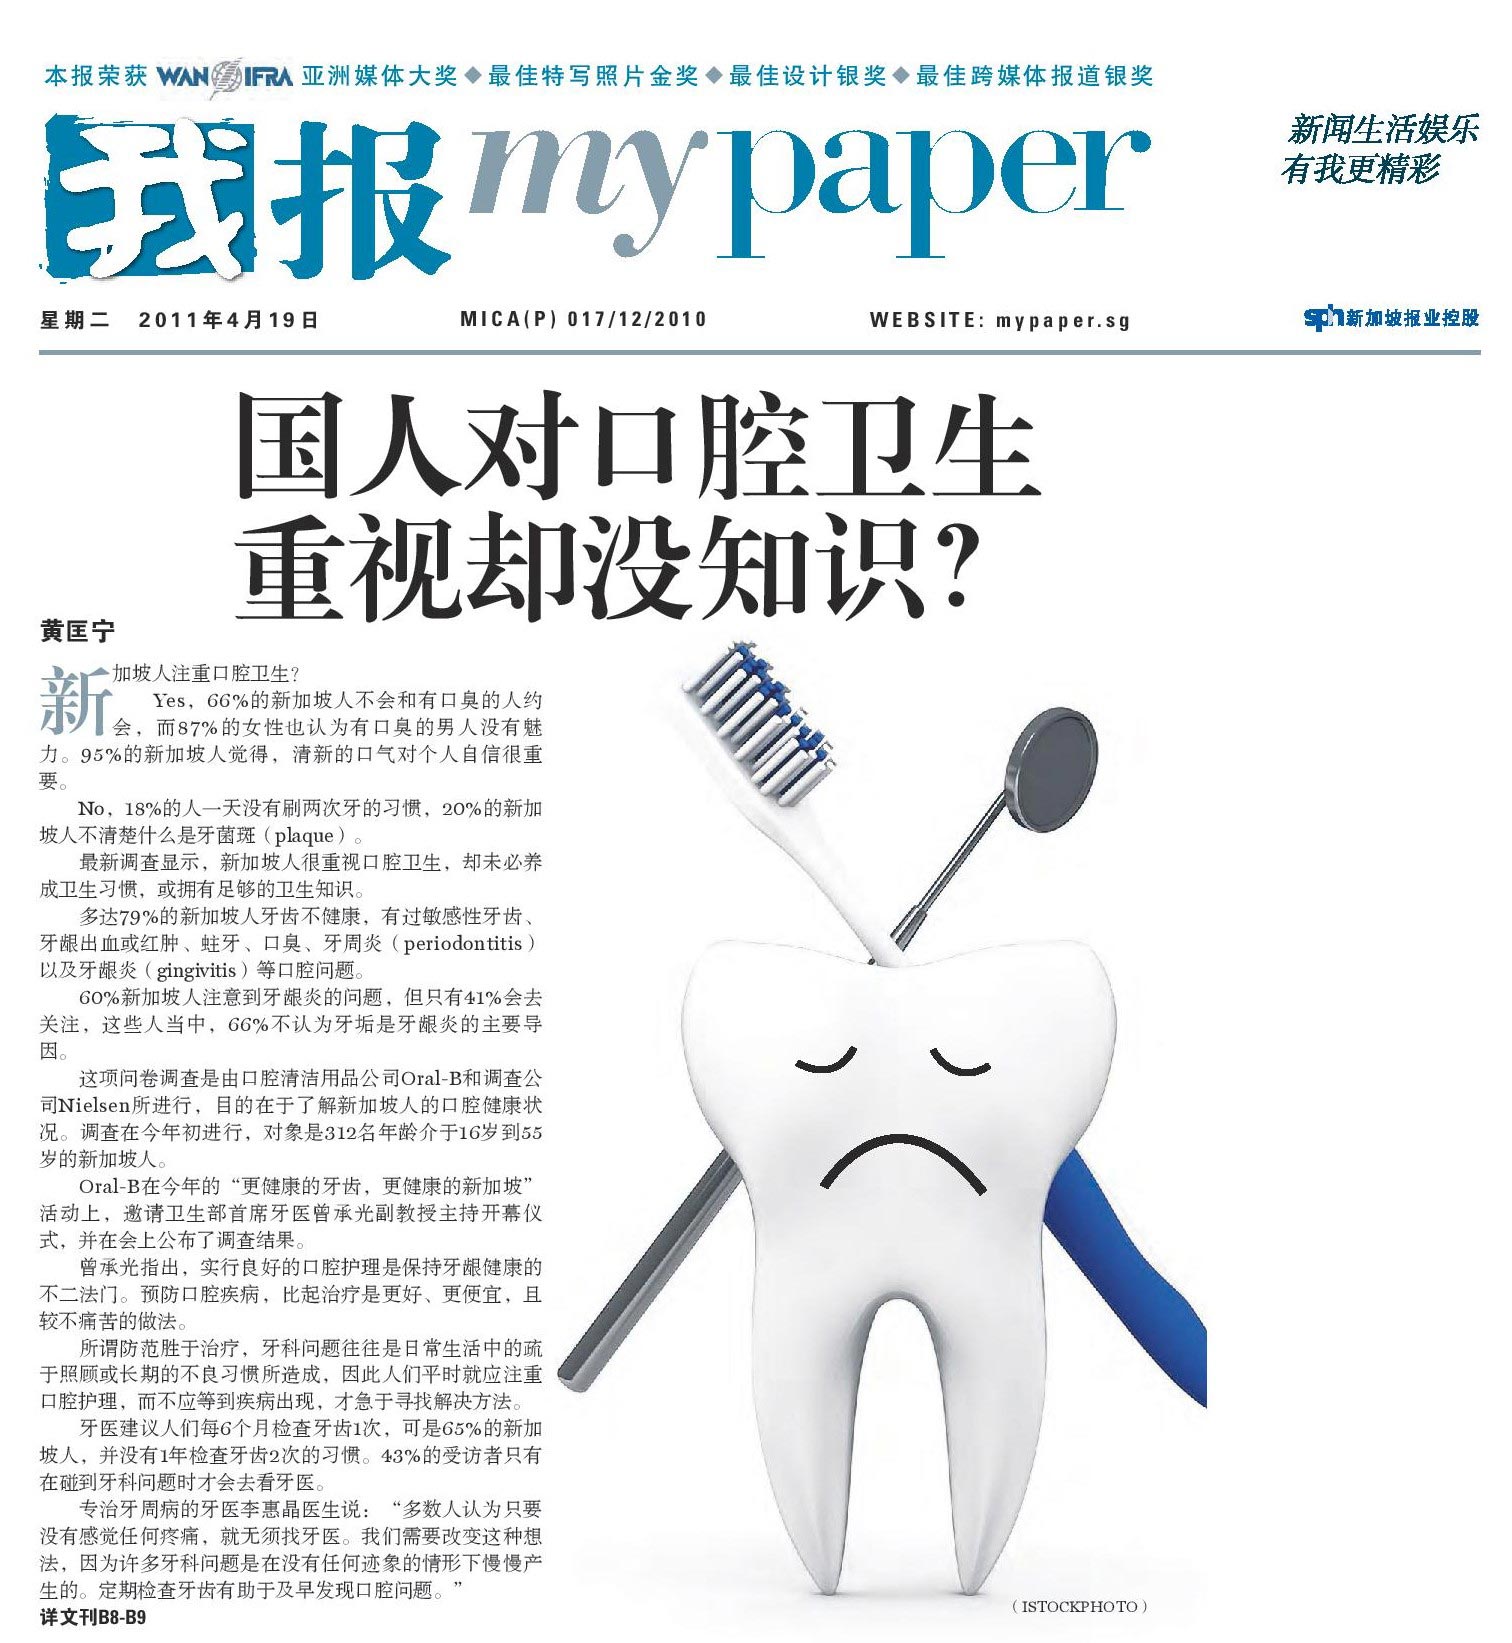 My Paper Newspaper, April 19, 2011: “Singaporeans know the importance of Oral Health yet lack knowledge about it?”